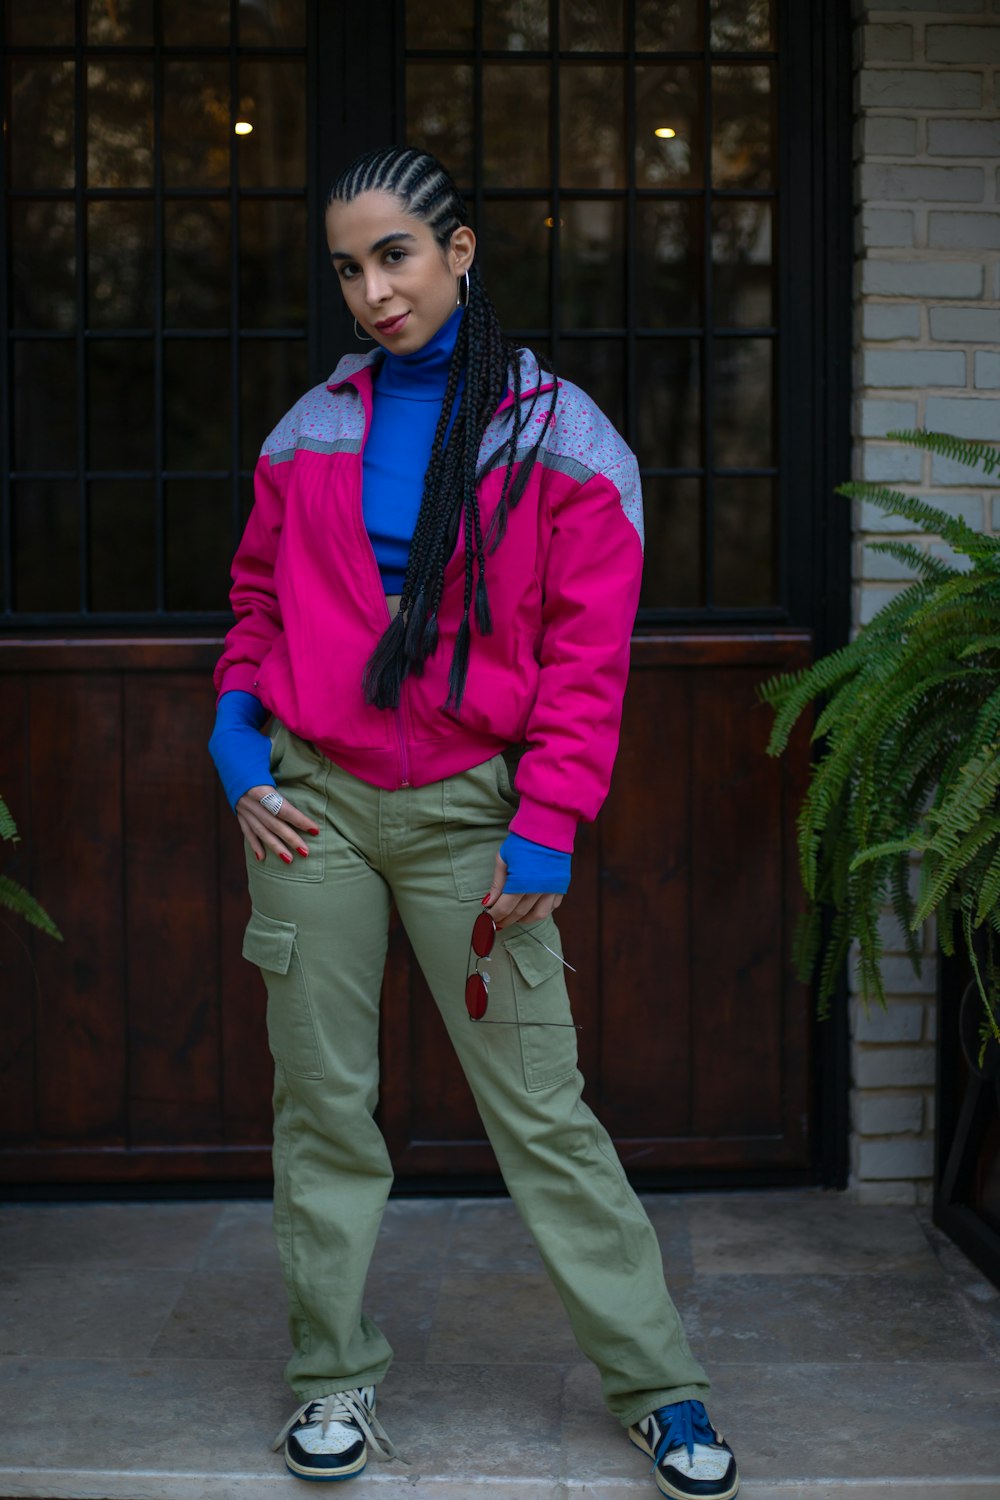 a woman standing in front of a door wearing a pink and blue jacket